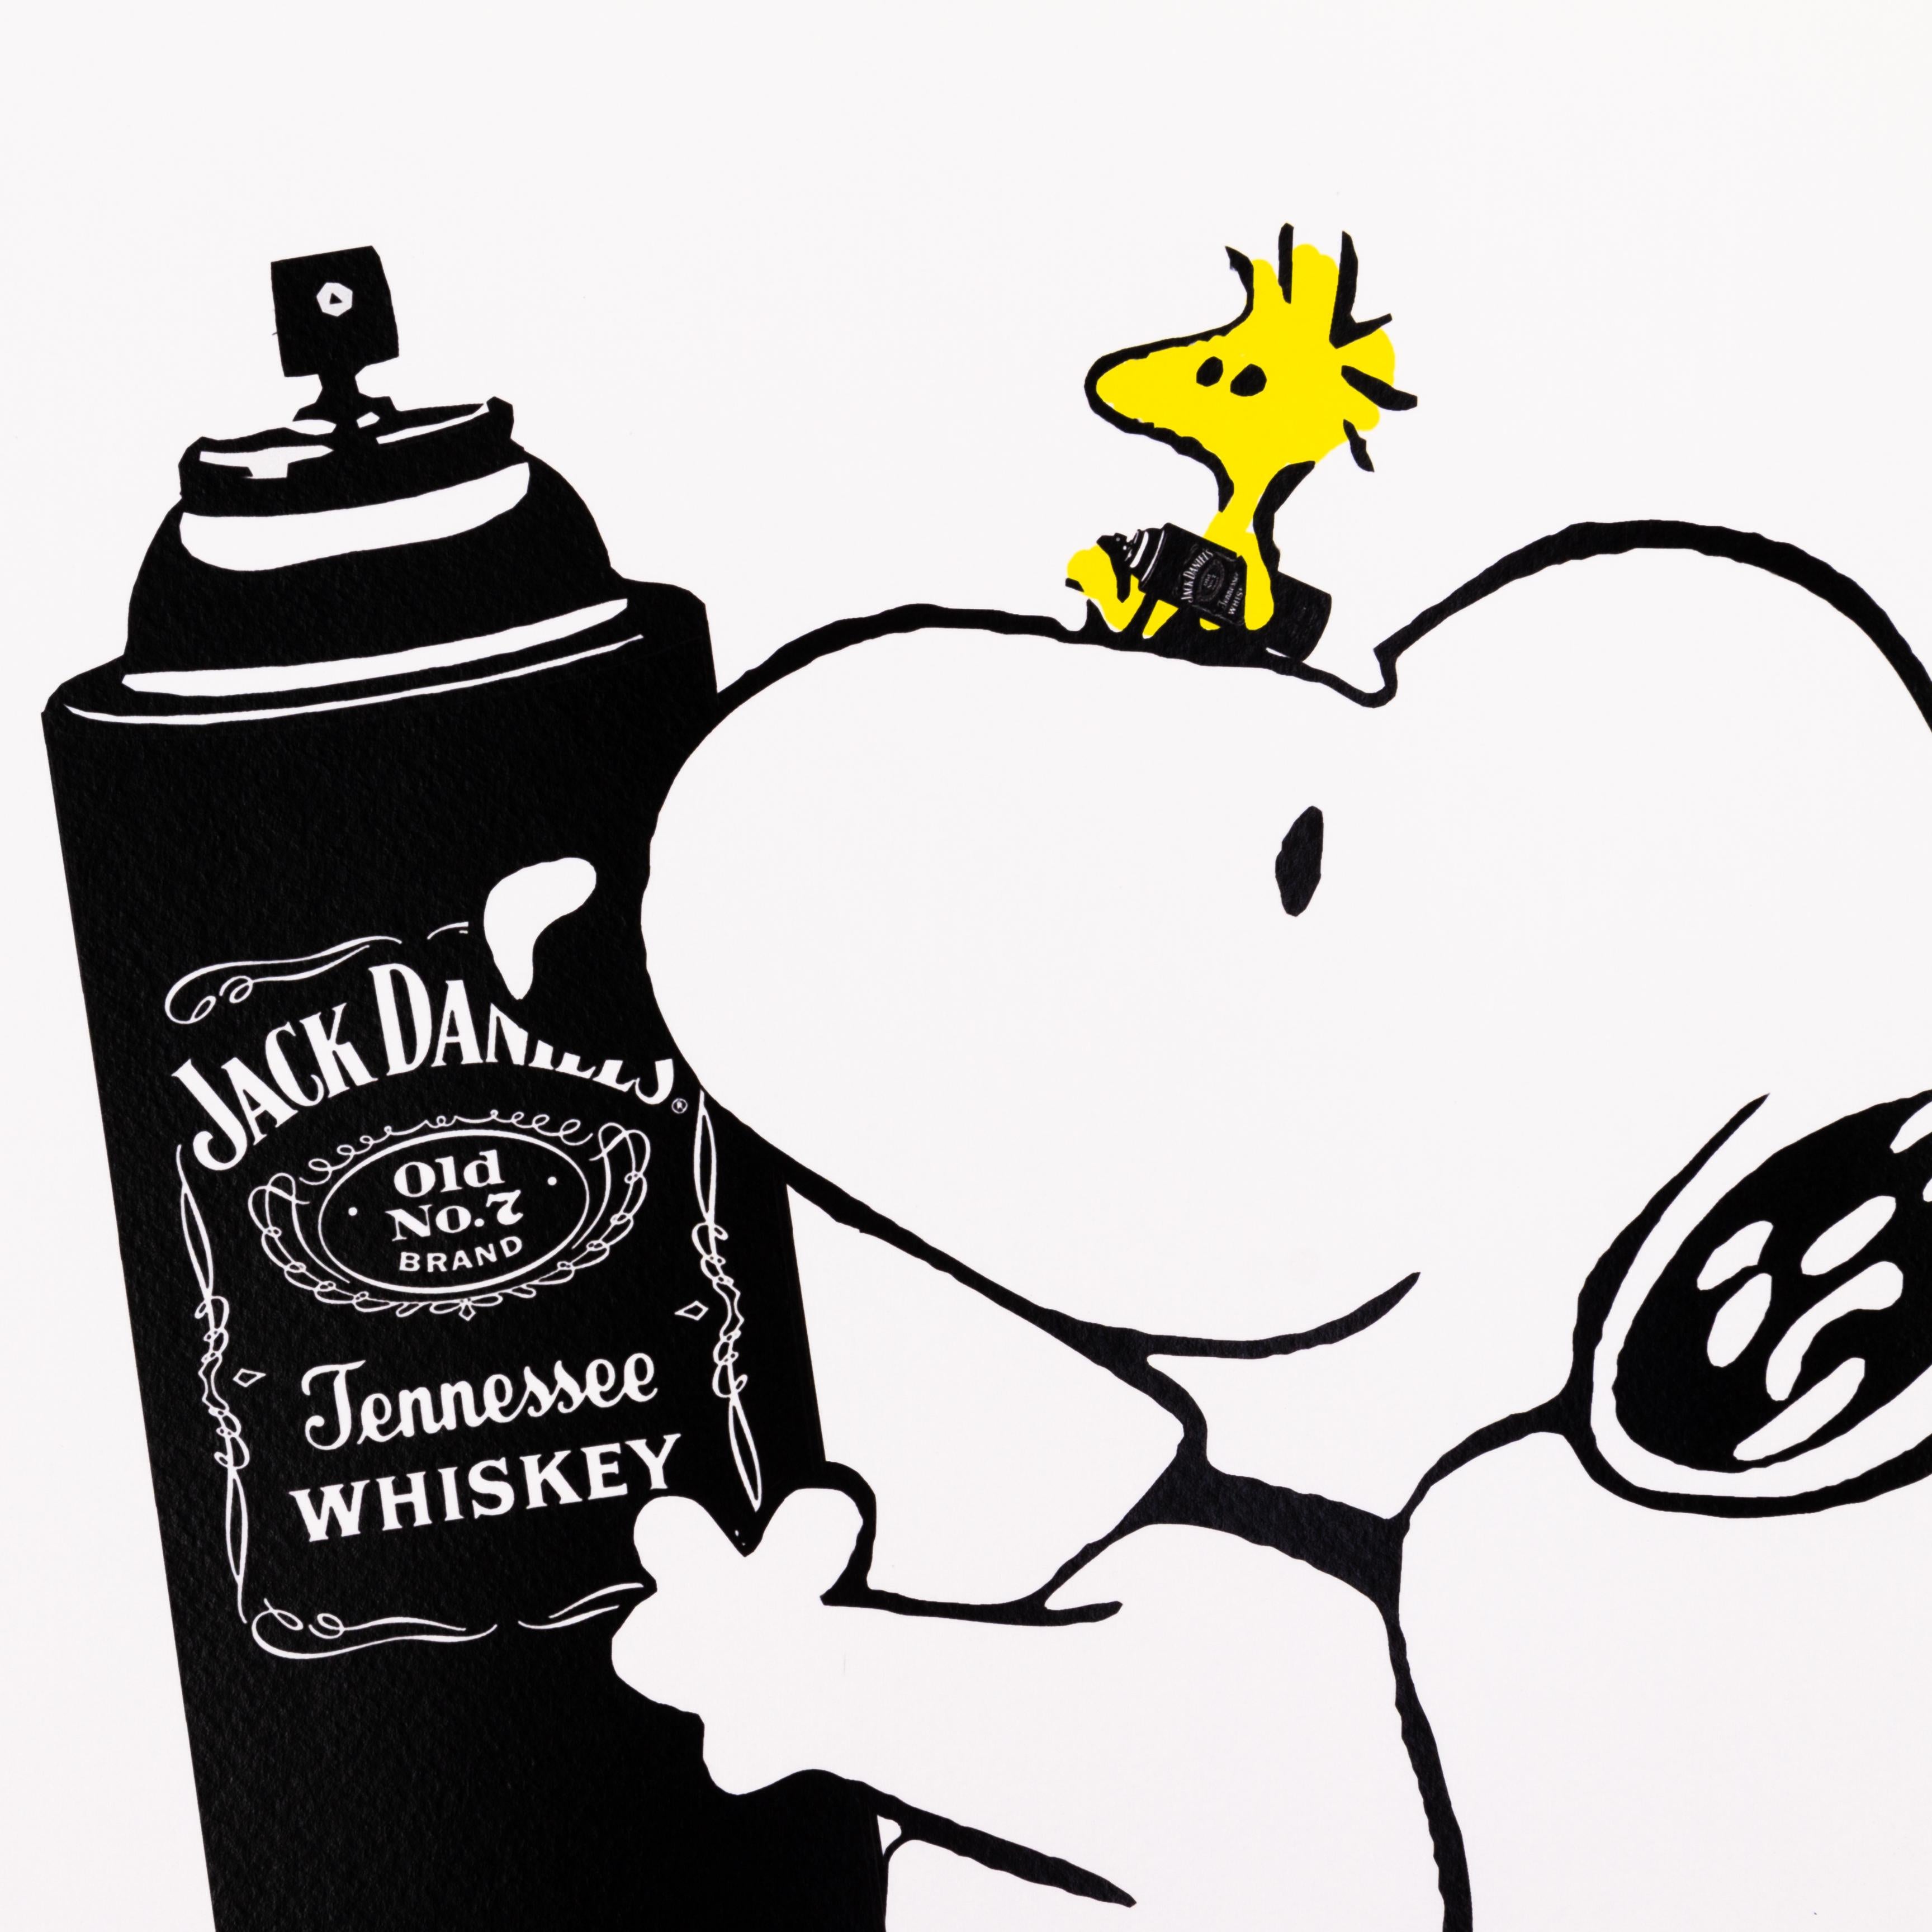 Death NYC Signed Limited Ed Pop Art Print Snoopy Jack Daniel's
From a private English collection
Free international shipping

